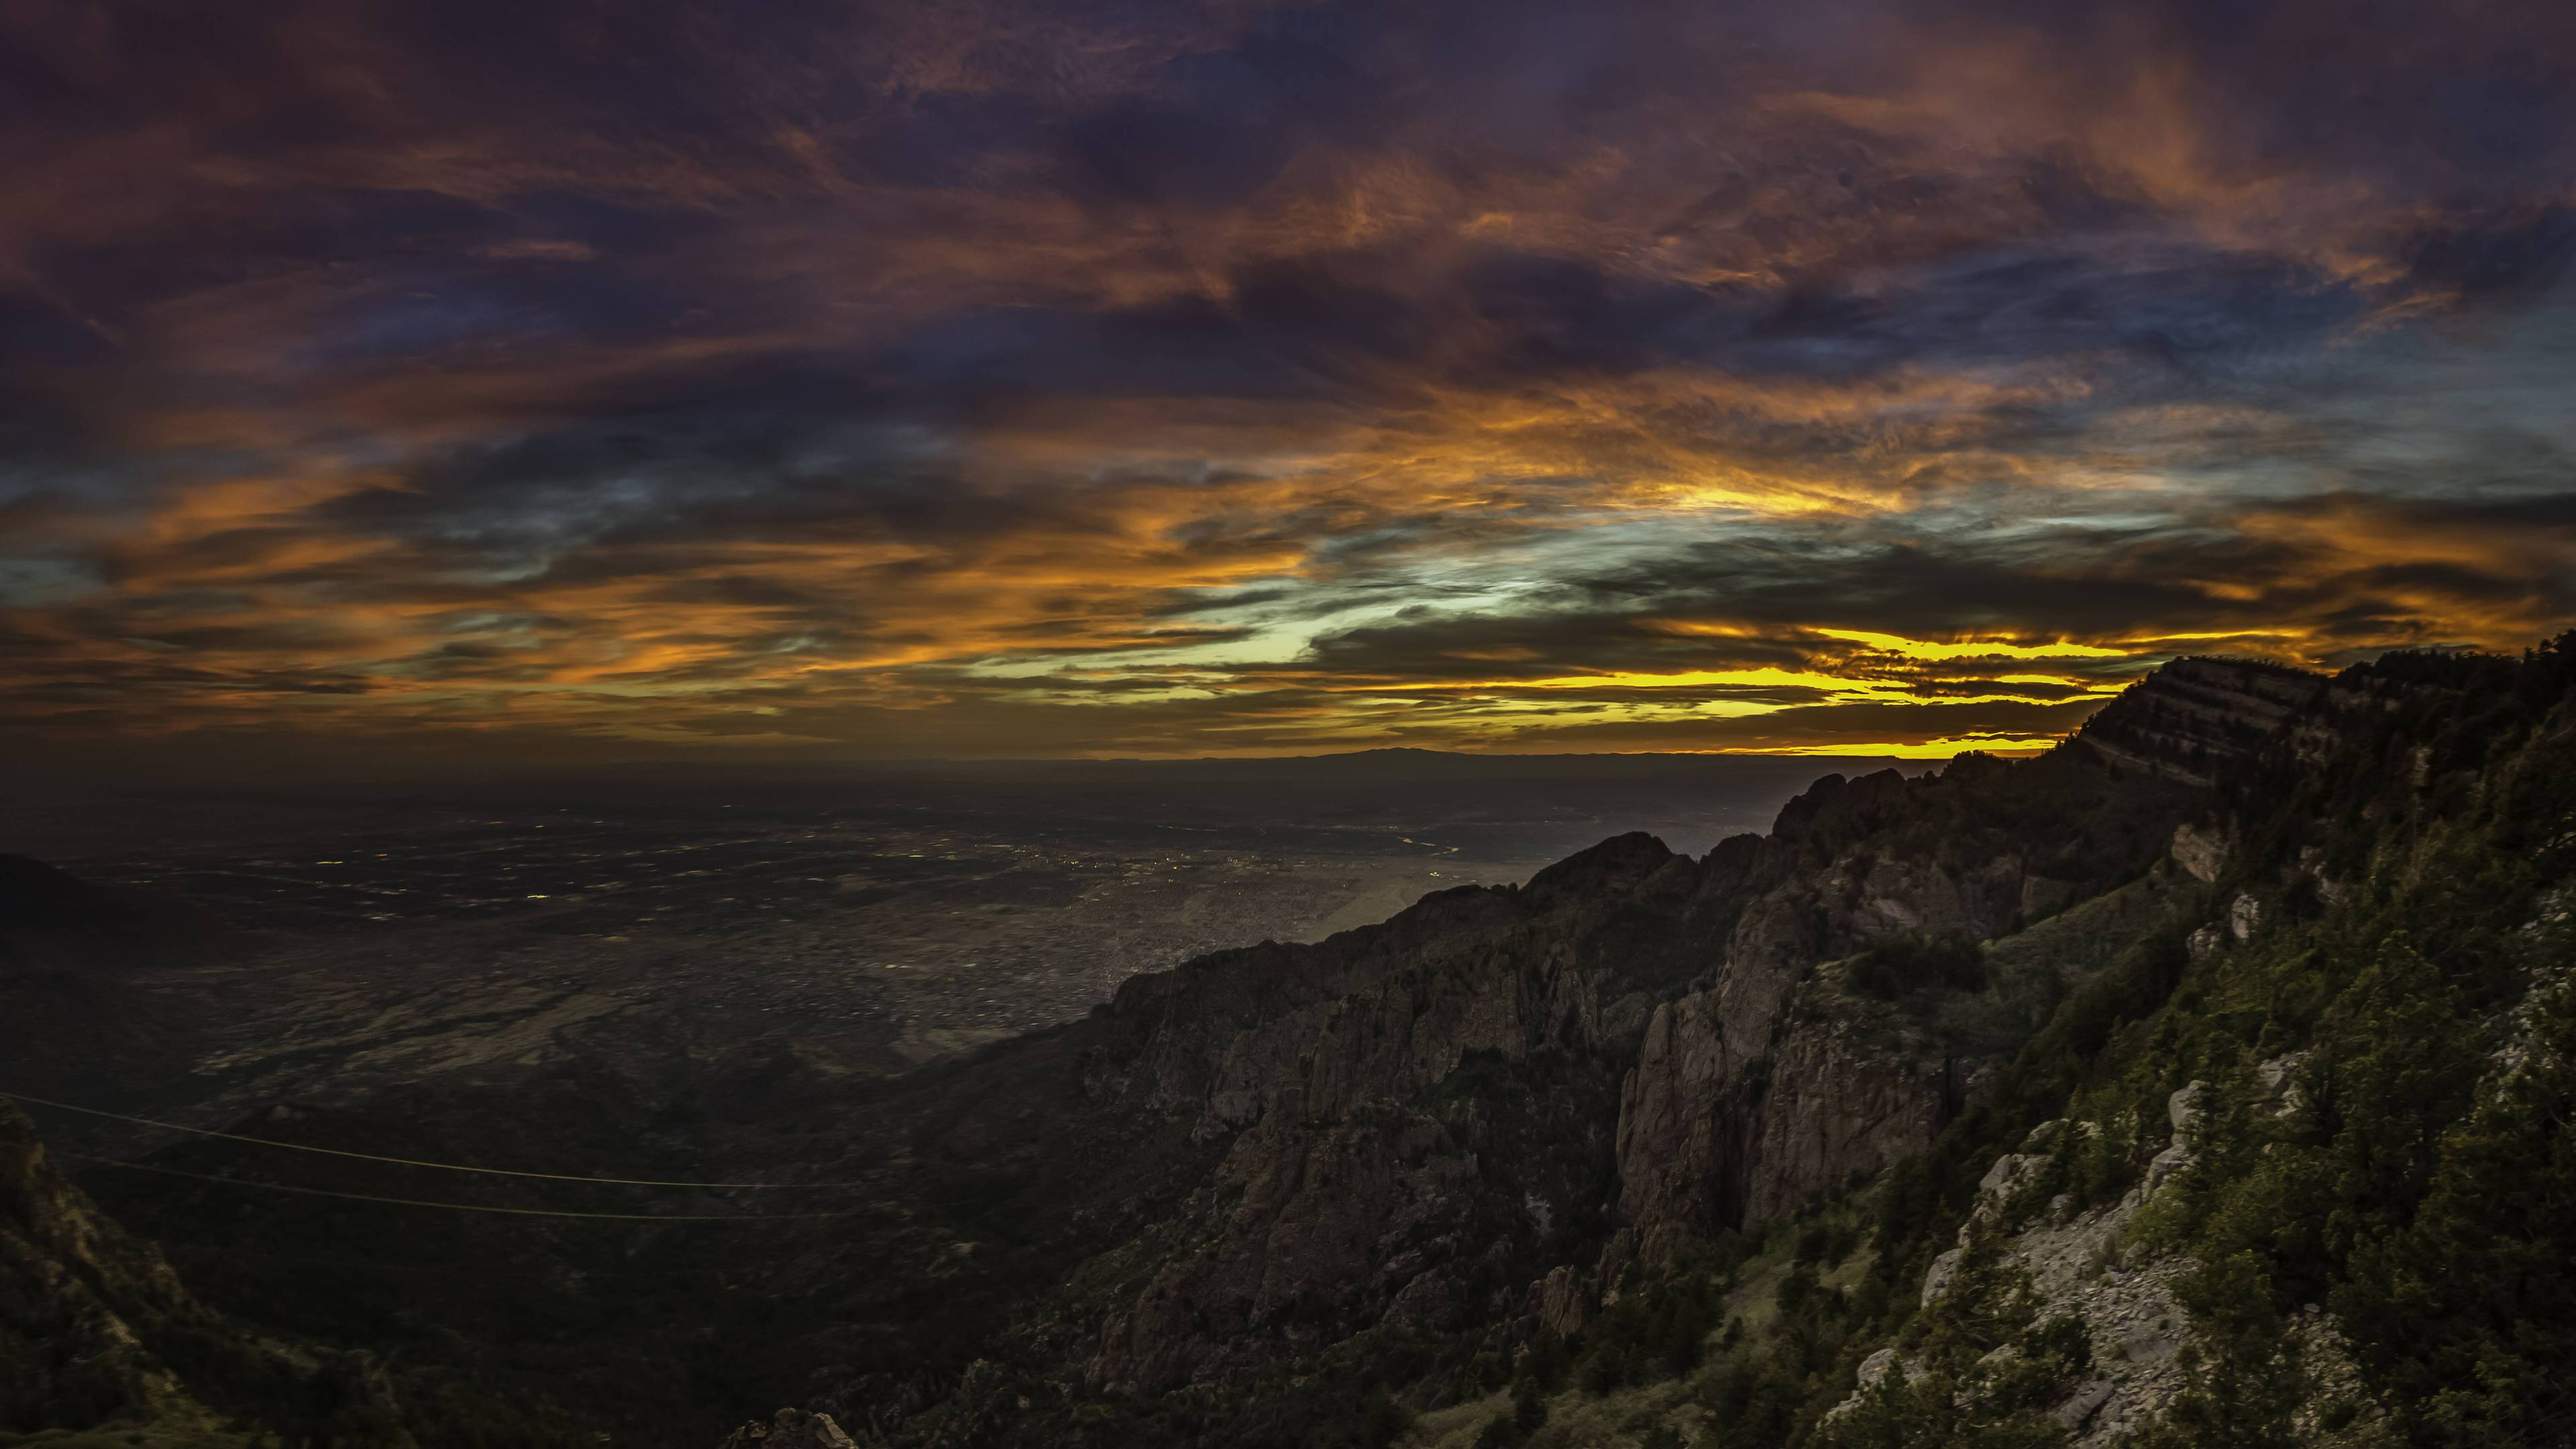 BOTPOST] The view of Albuquerque, New Mexico at sunset from Sandia Peak. [3840x2160], WQHD_Wallpaper